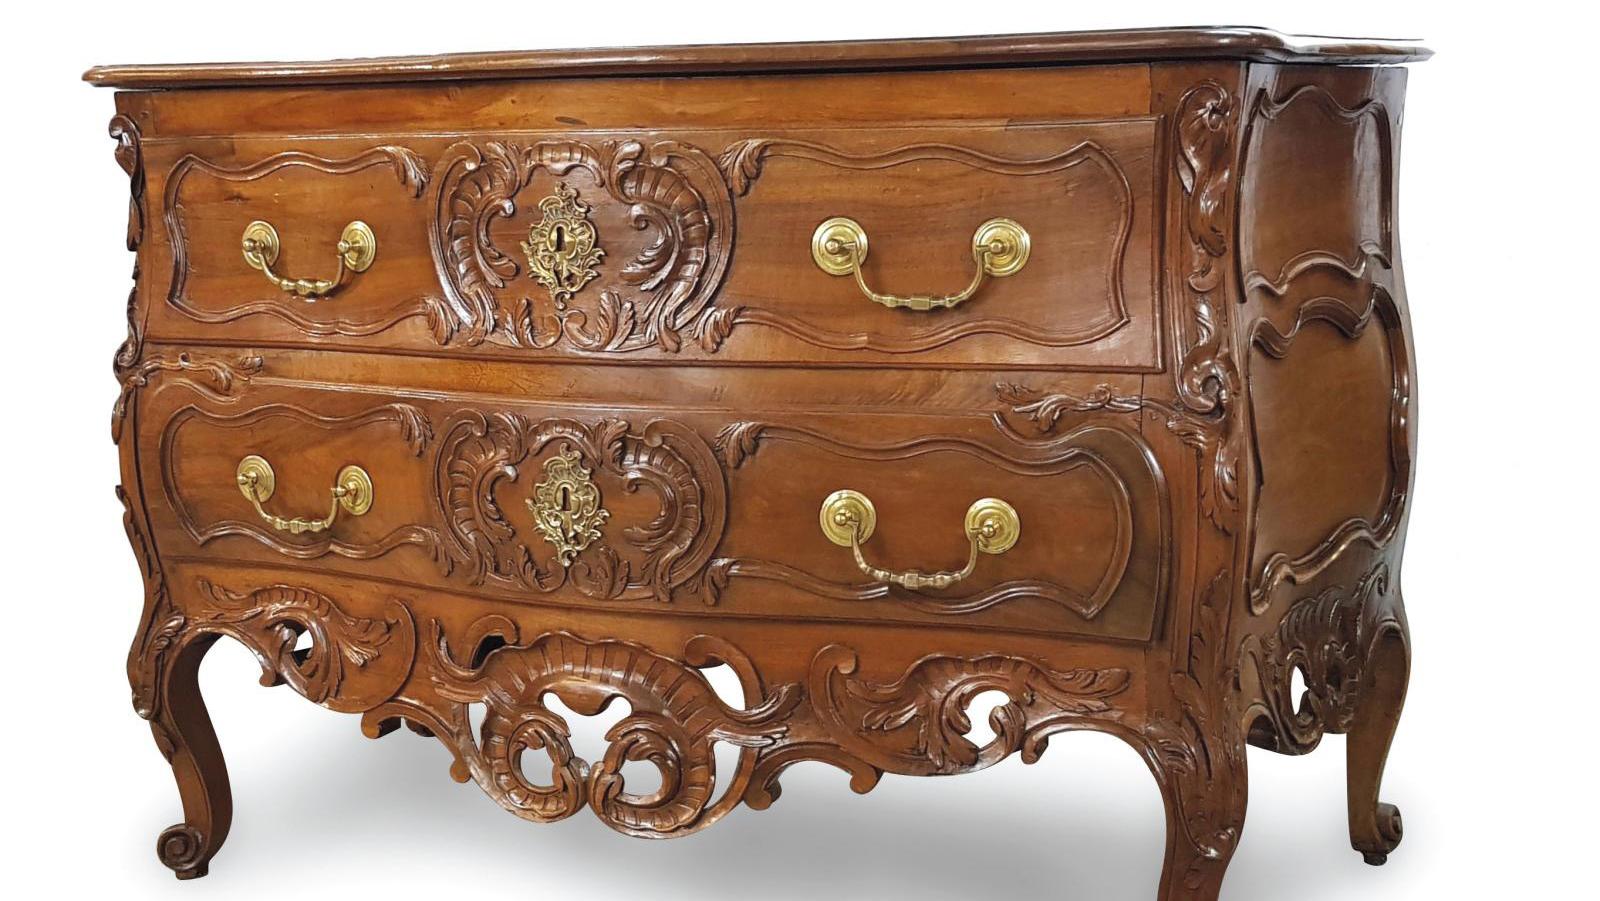   A Louis XV Provence Style Chest of Draw Sparks Interest